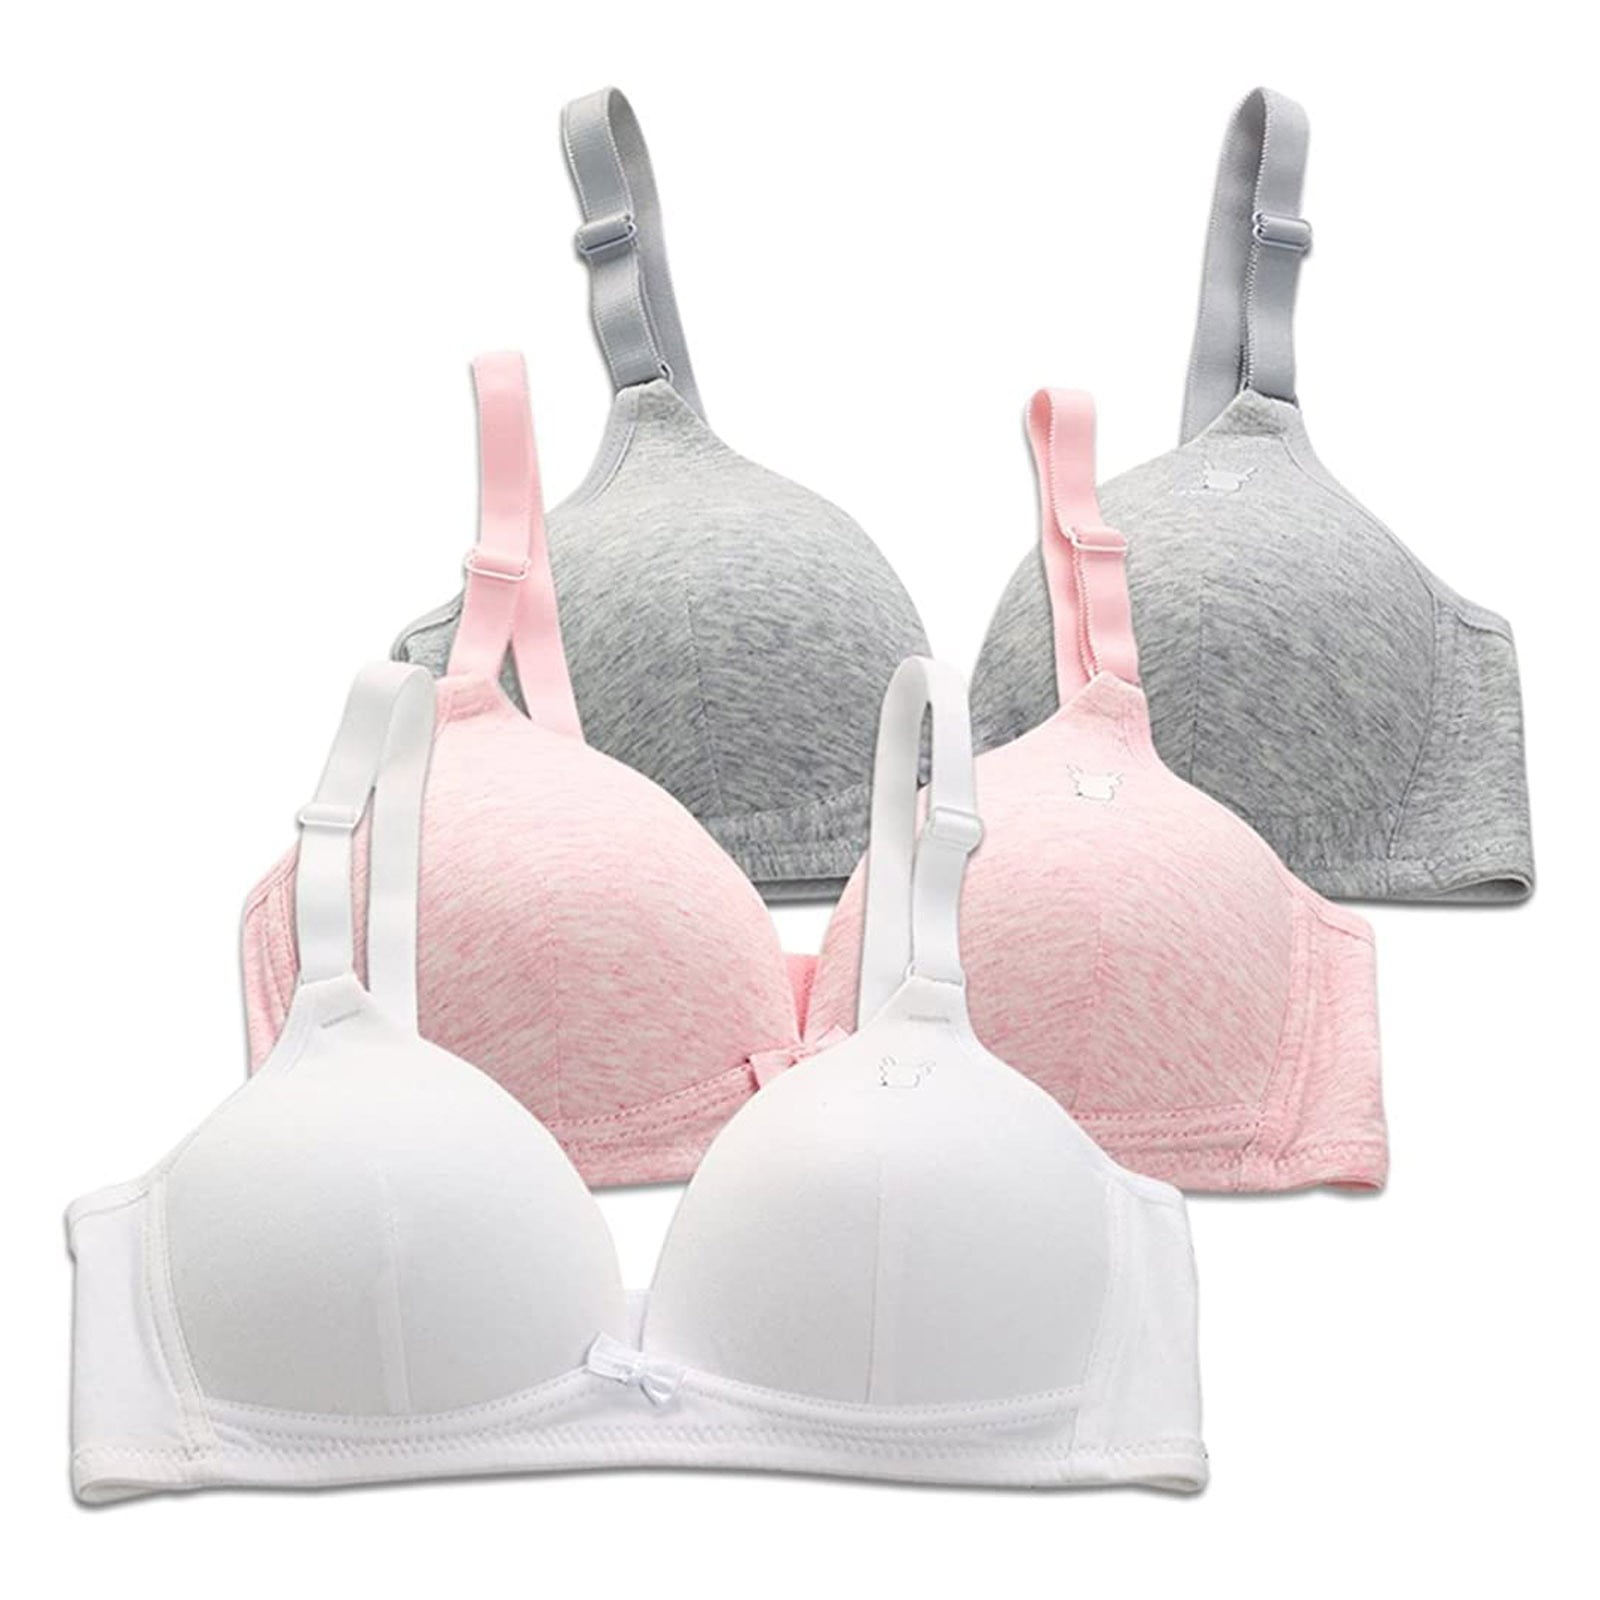 Full Busted Figure Types in 36C Bra Size B Cup Sizes Deep Sand Twin Firm by  Anita T-Shirt Bras